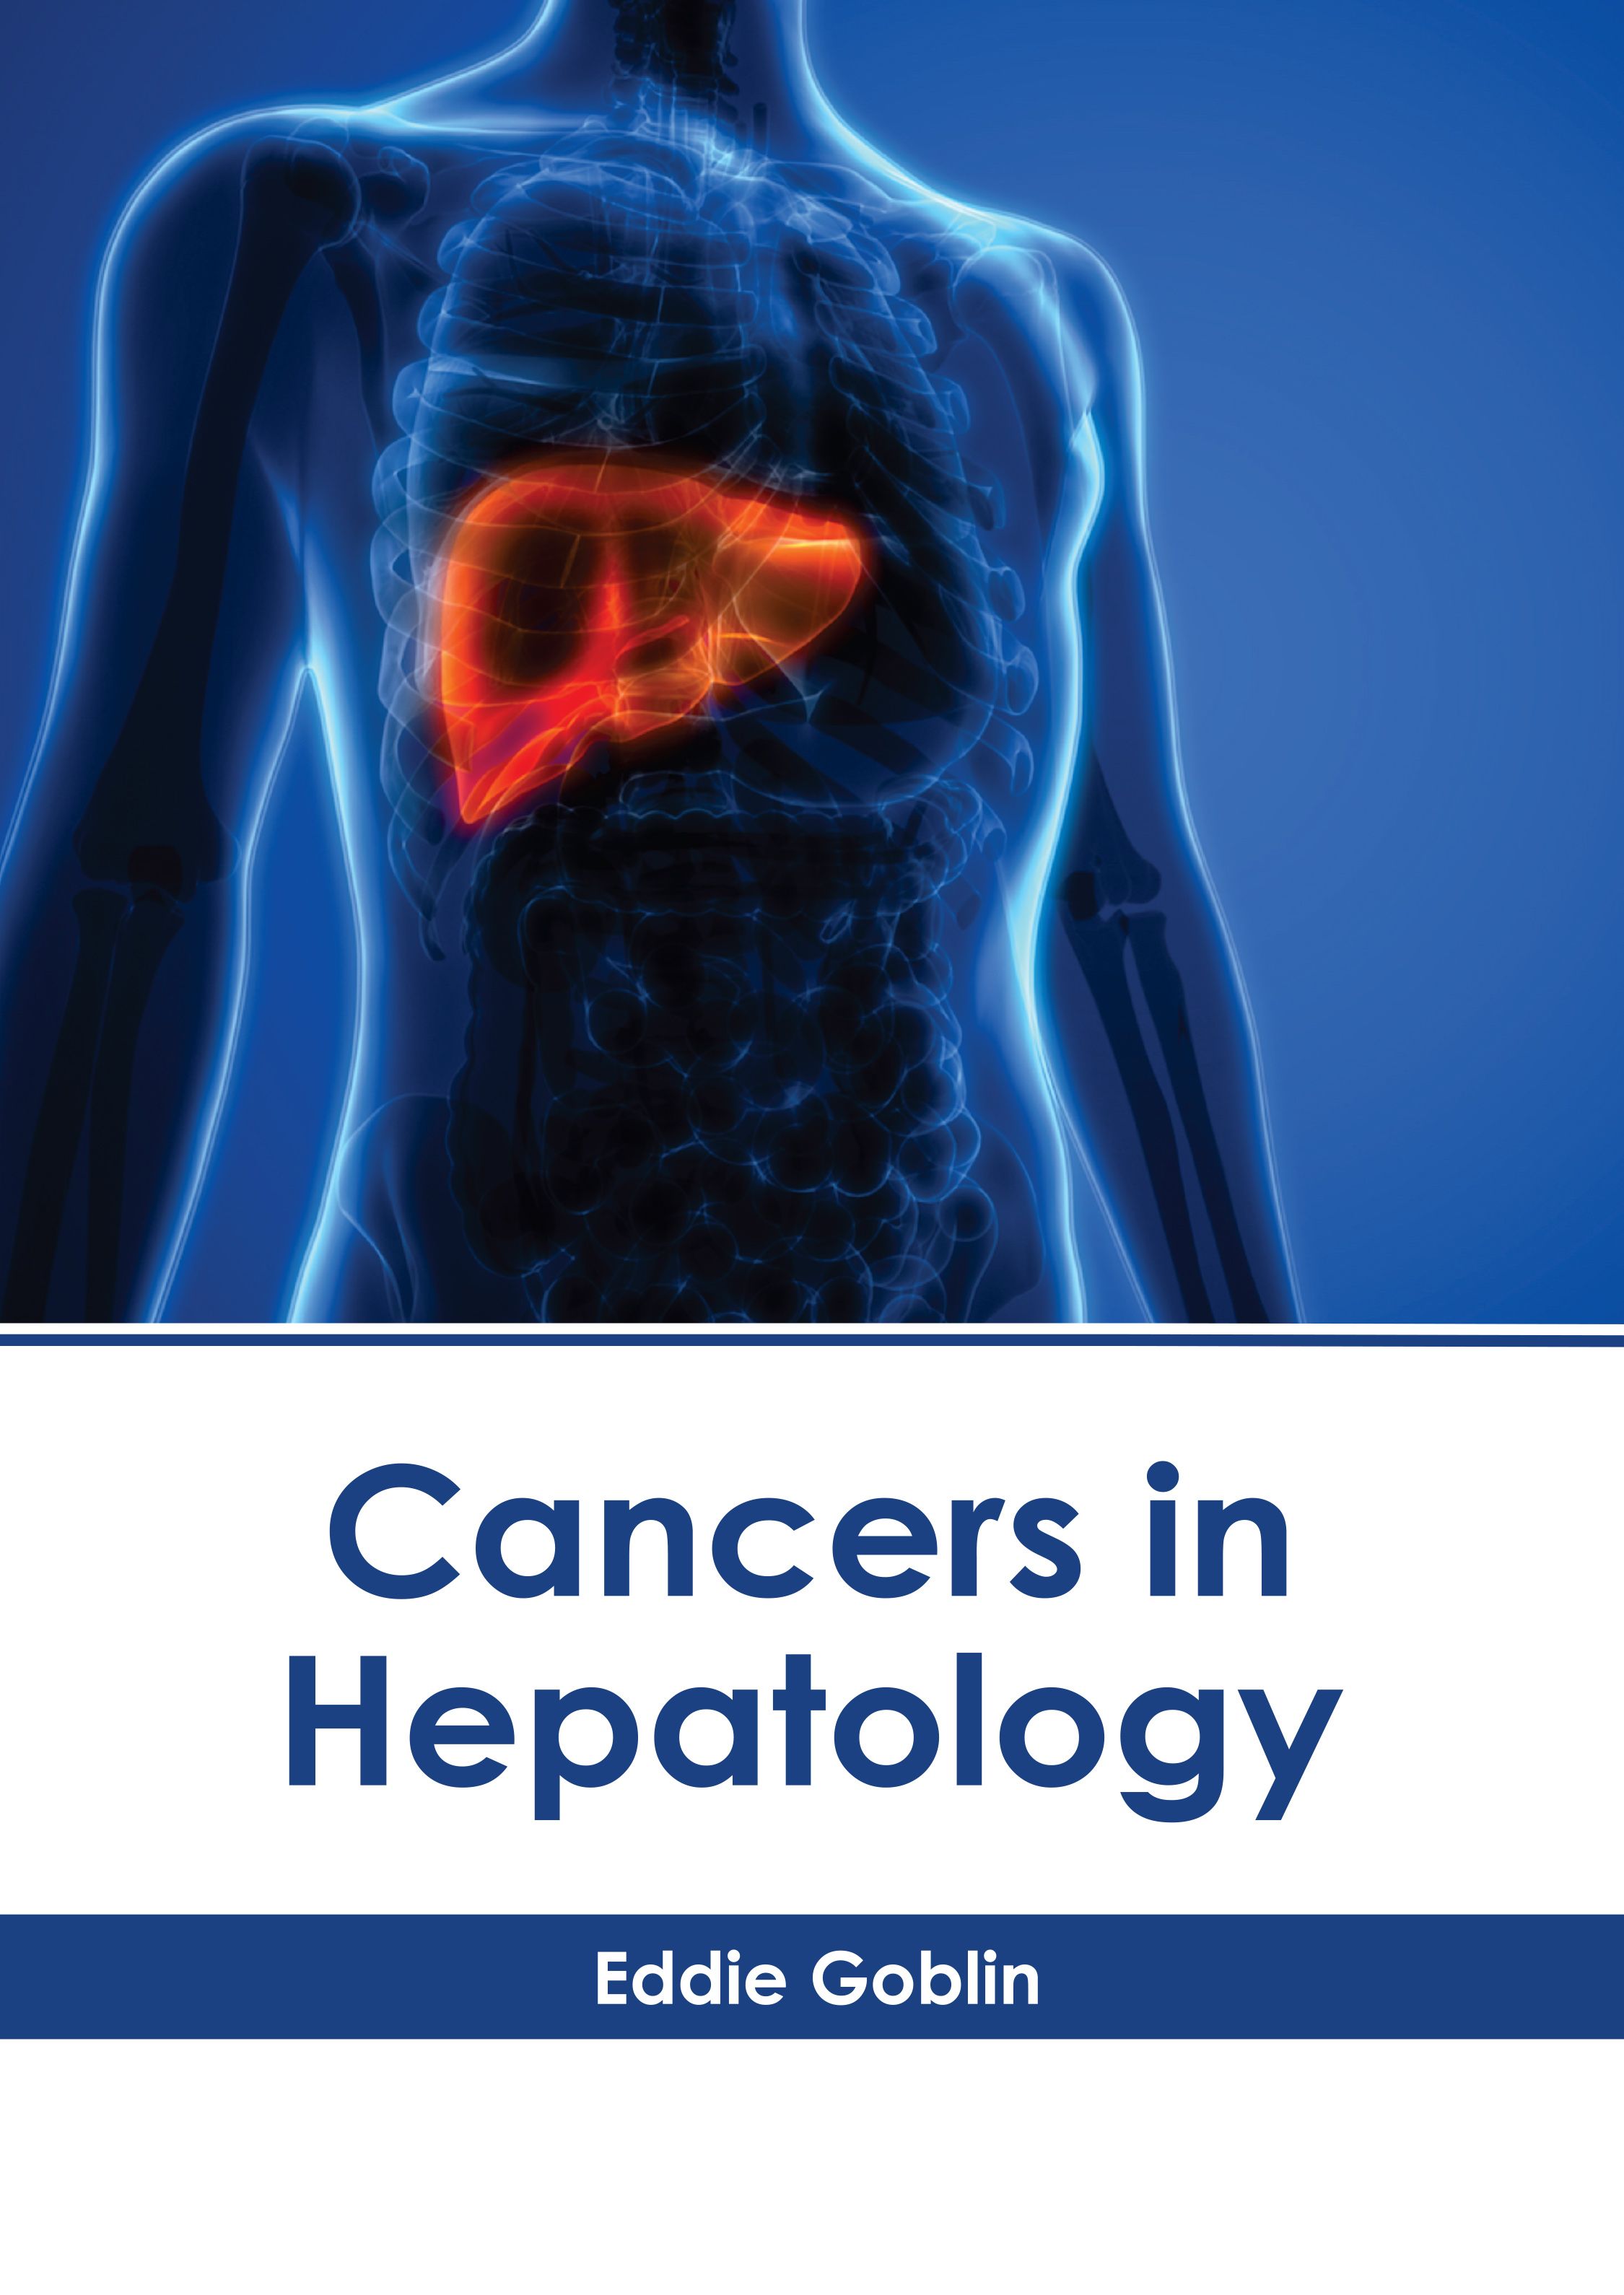 

exclusive-publishers/american-medical-publishers/cancers-in-hepatology-9781639279562